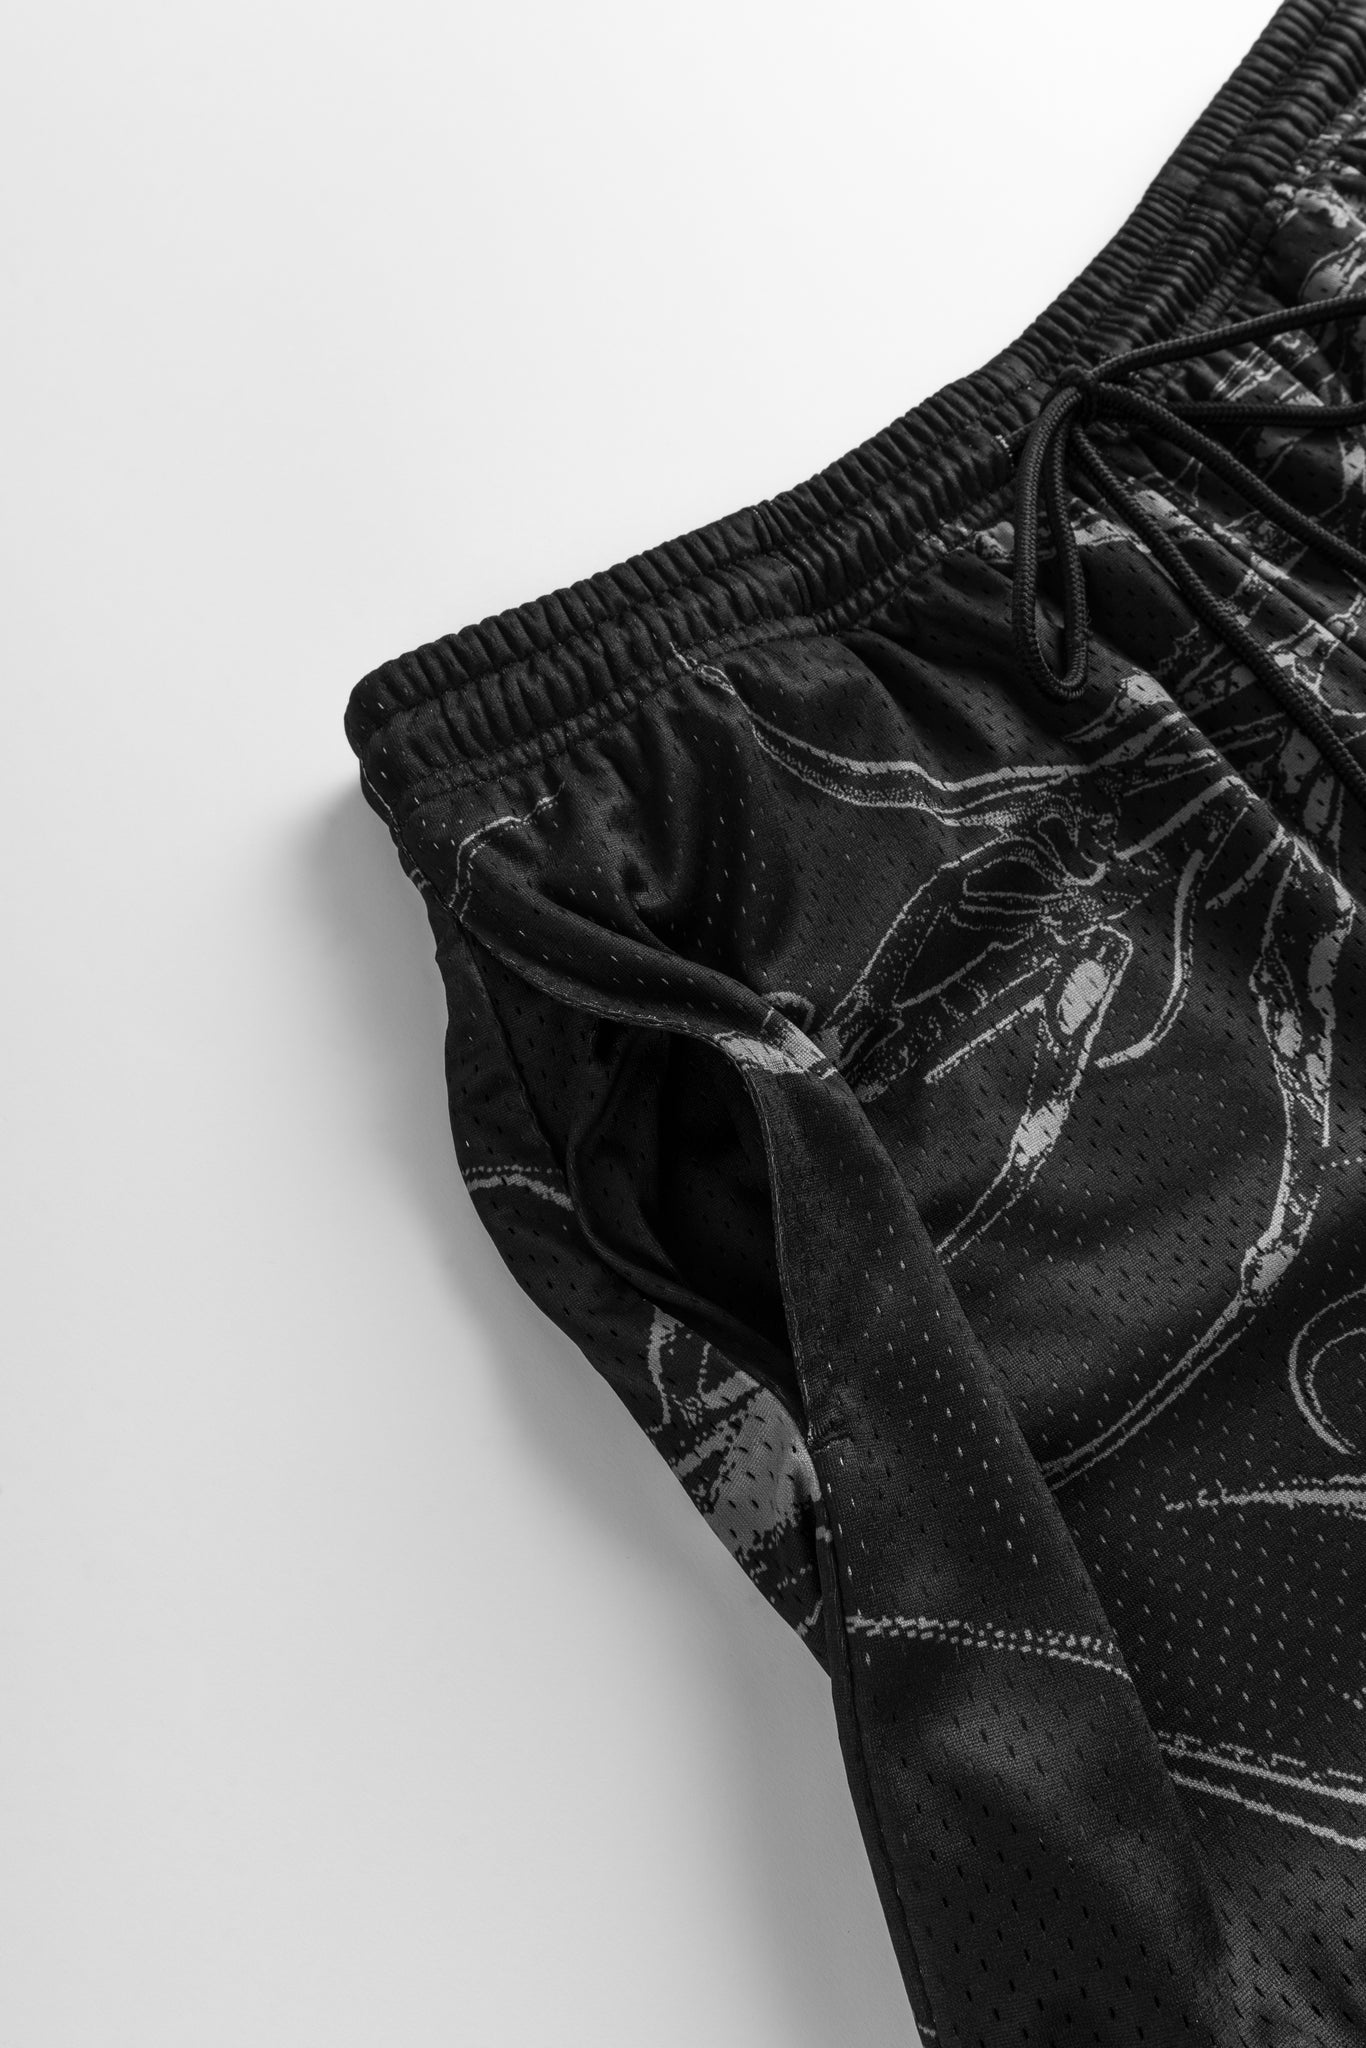 Synapse [ patch ] Mesh Shorts